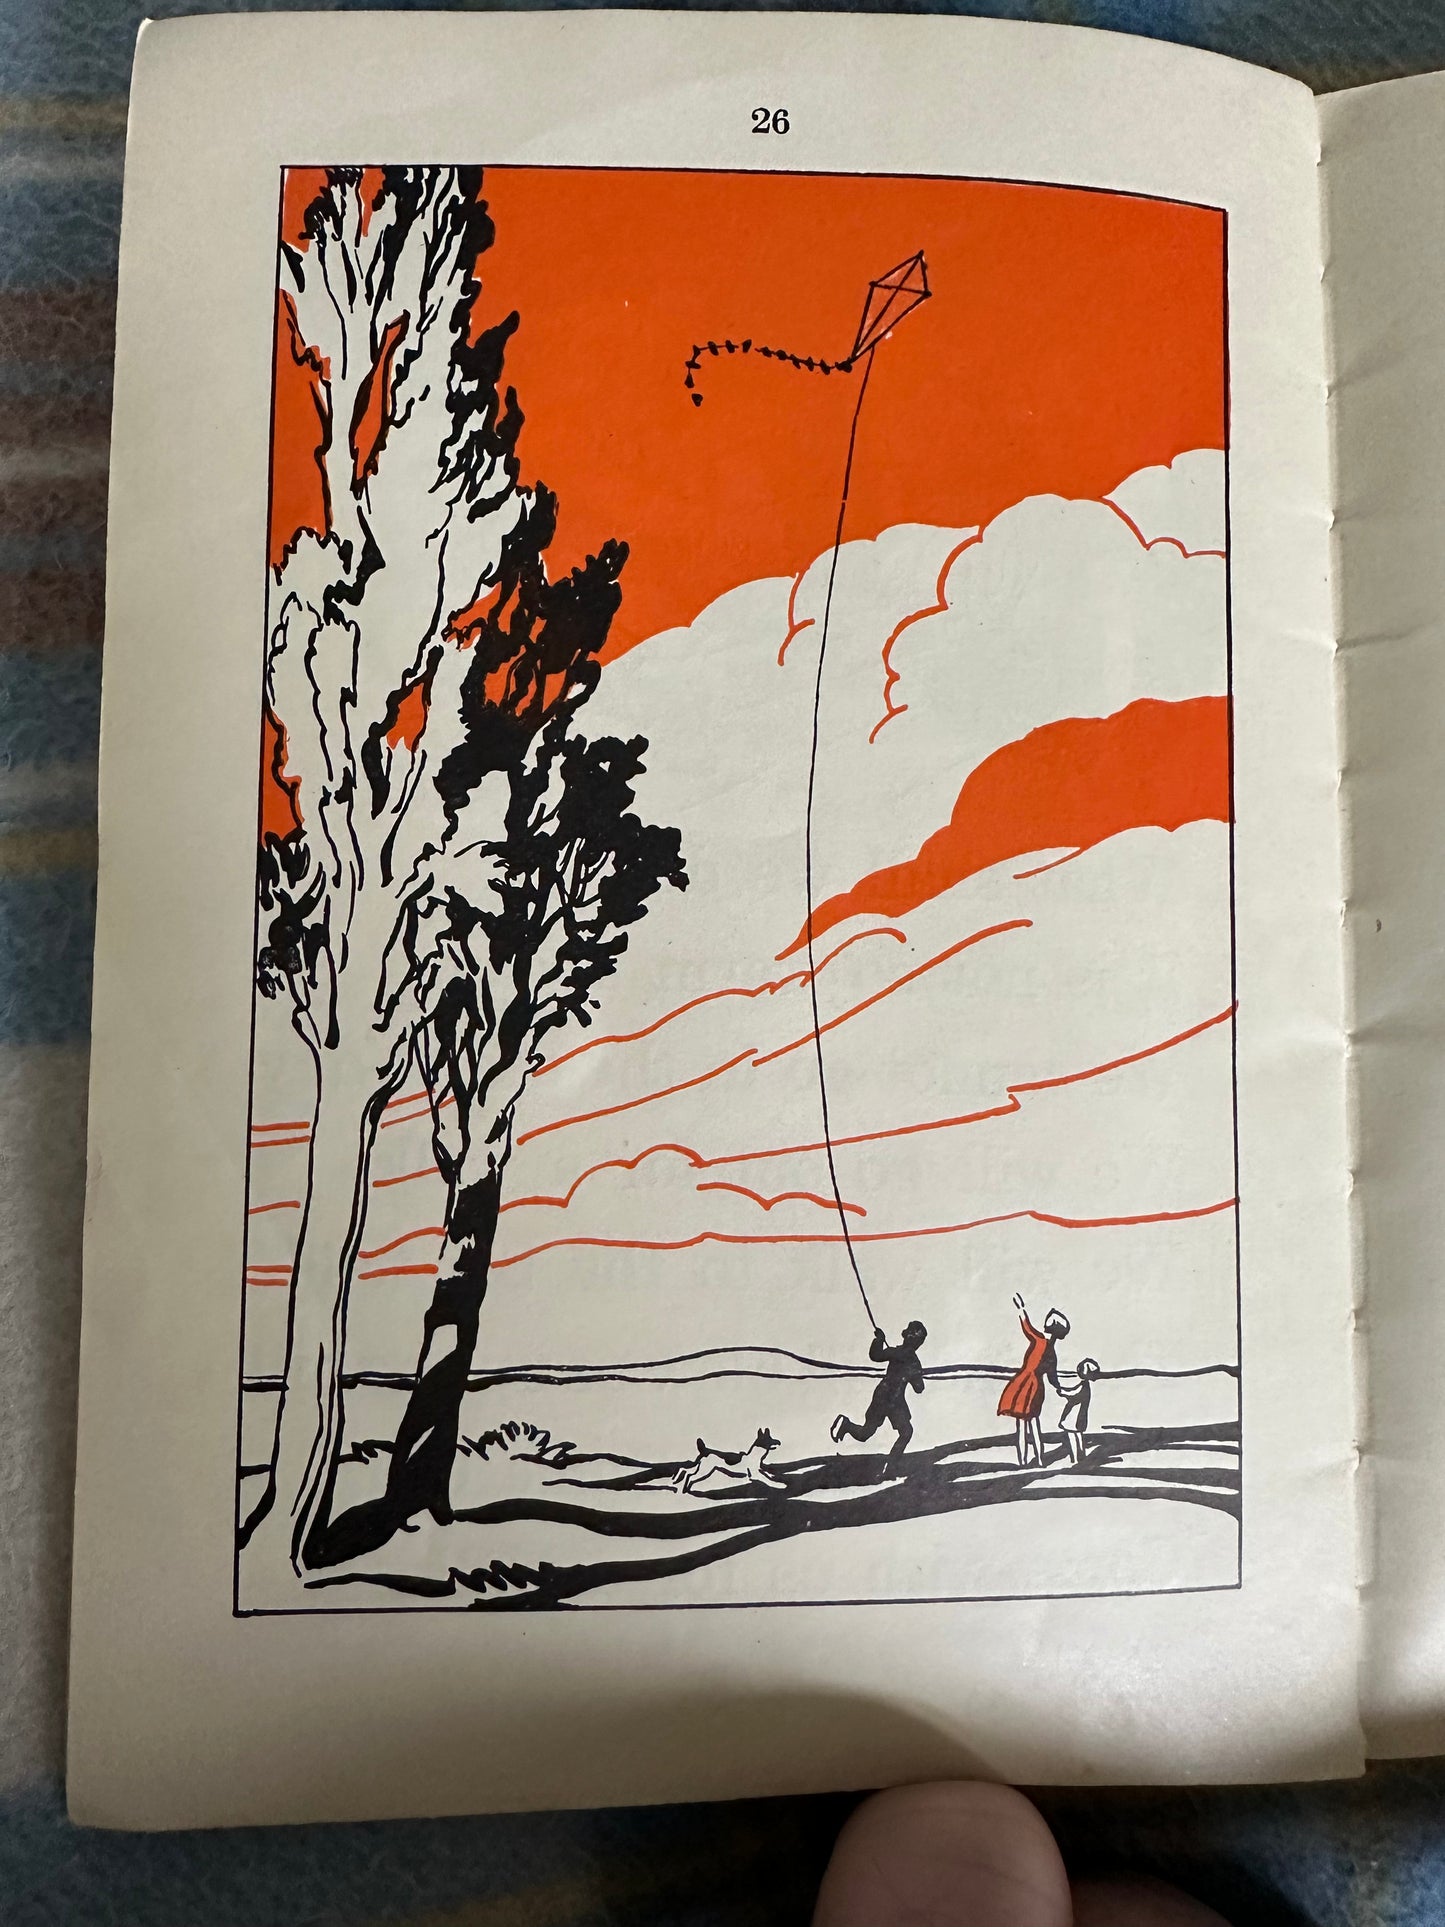 1955 The Holloway Readers Book One - E.S. Holloway(drawings H. Radcliffe Wilson) Ginn & Company Ltd)